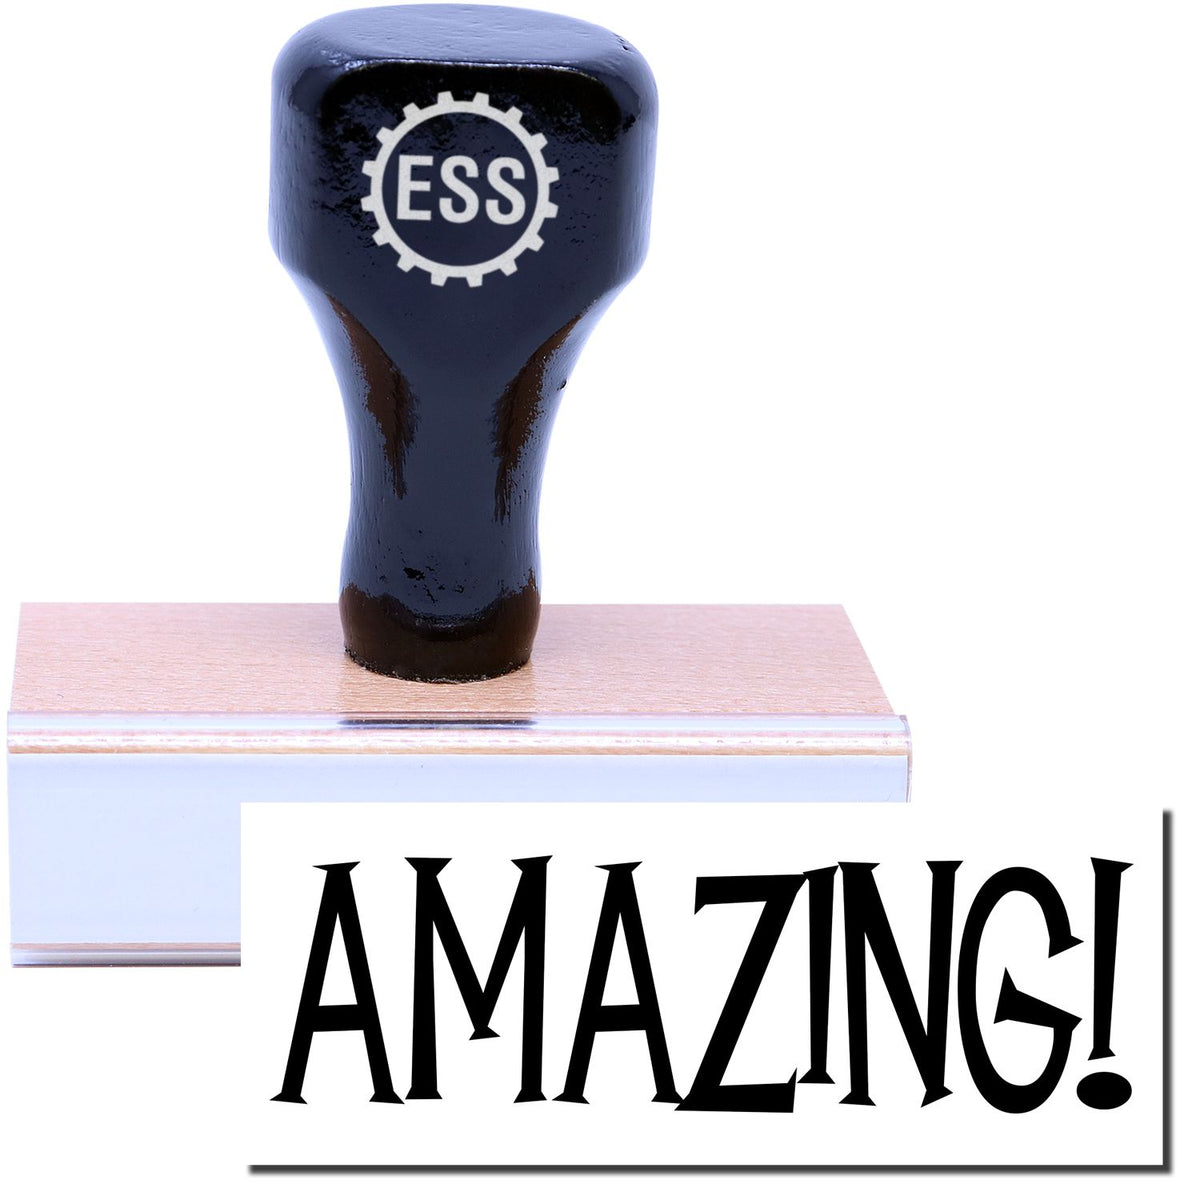 A stock office rubber stamp with a stamped image showing how the text &quot;AMAZING!&quot; in a large font is displayed after stamping.